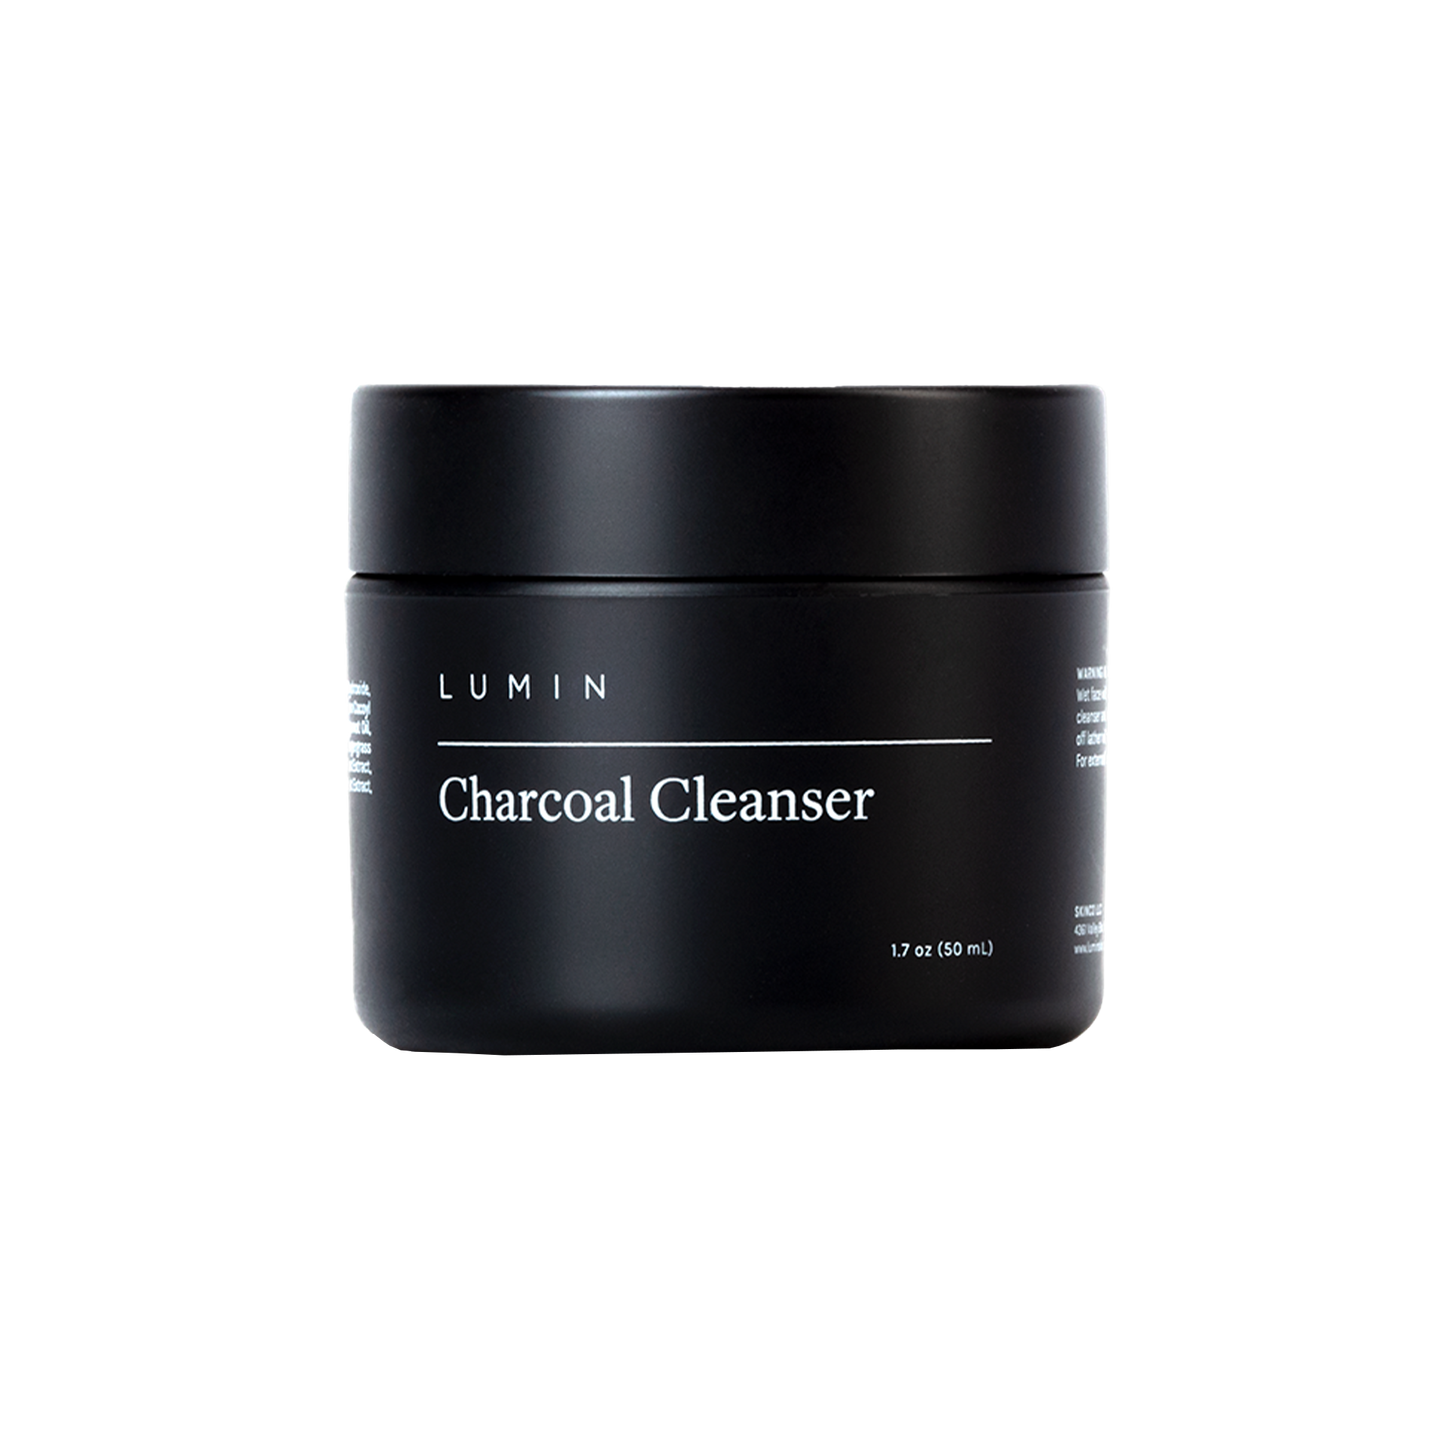 Lumin Charcoal Cleanser: Our daily charcoal face wash made for men’s skin provides a deep, satisfying clean for skin that feels healthier. Our skin-detoxifying Charcoal Cleanser removes grime while keeping your skin’s pH balanced. This exfoliating formula can help oily skin, removes dead skin cells and excess skin, and helps repair damaged skin. Uncover a clear, smooth, more youthful glow with consistent use.